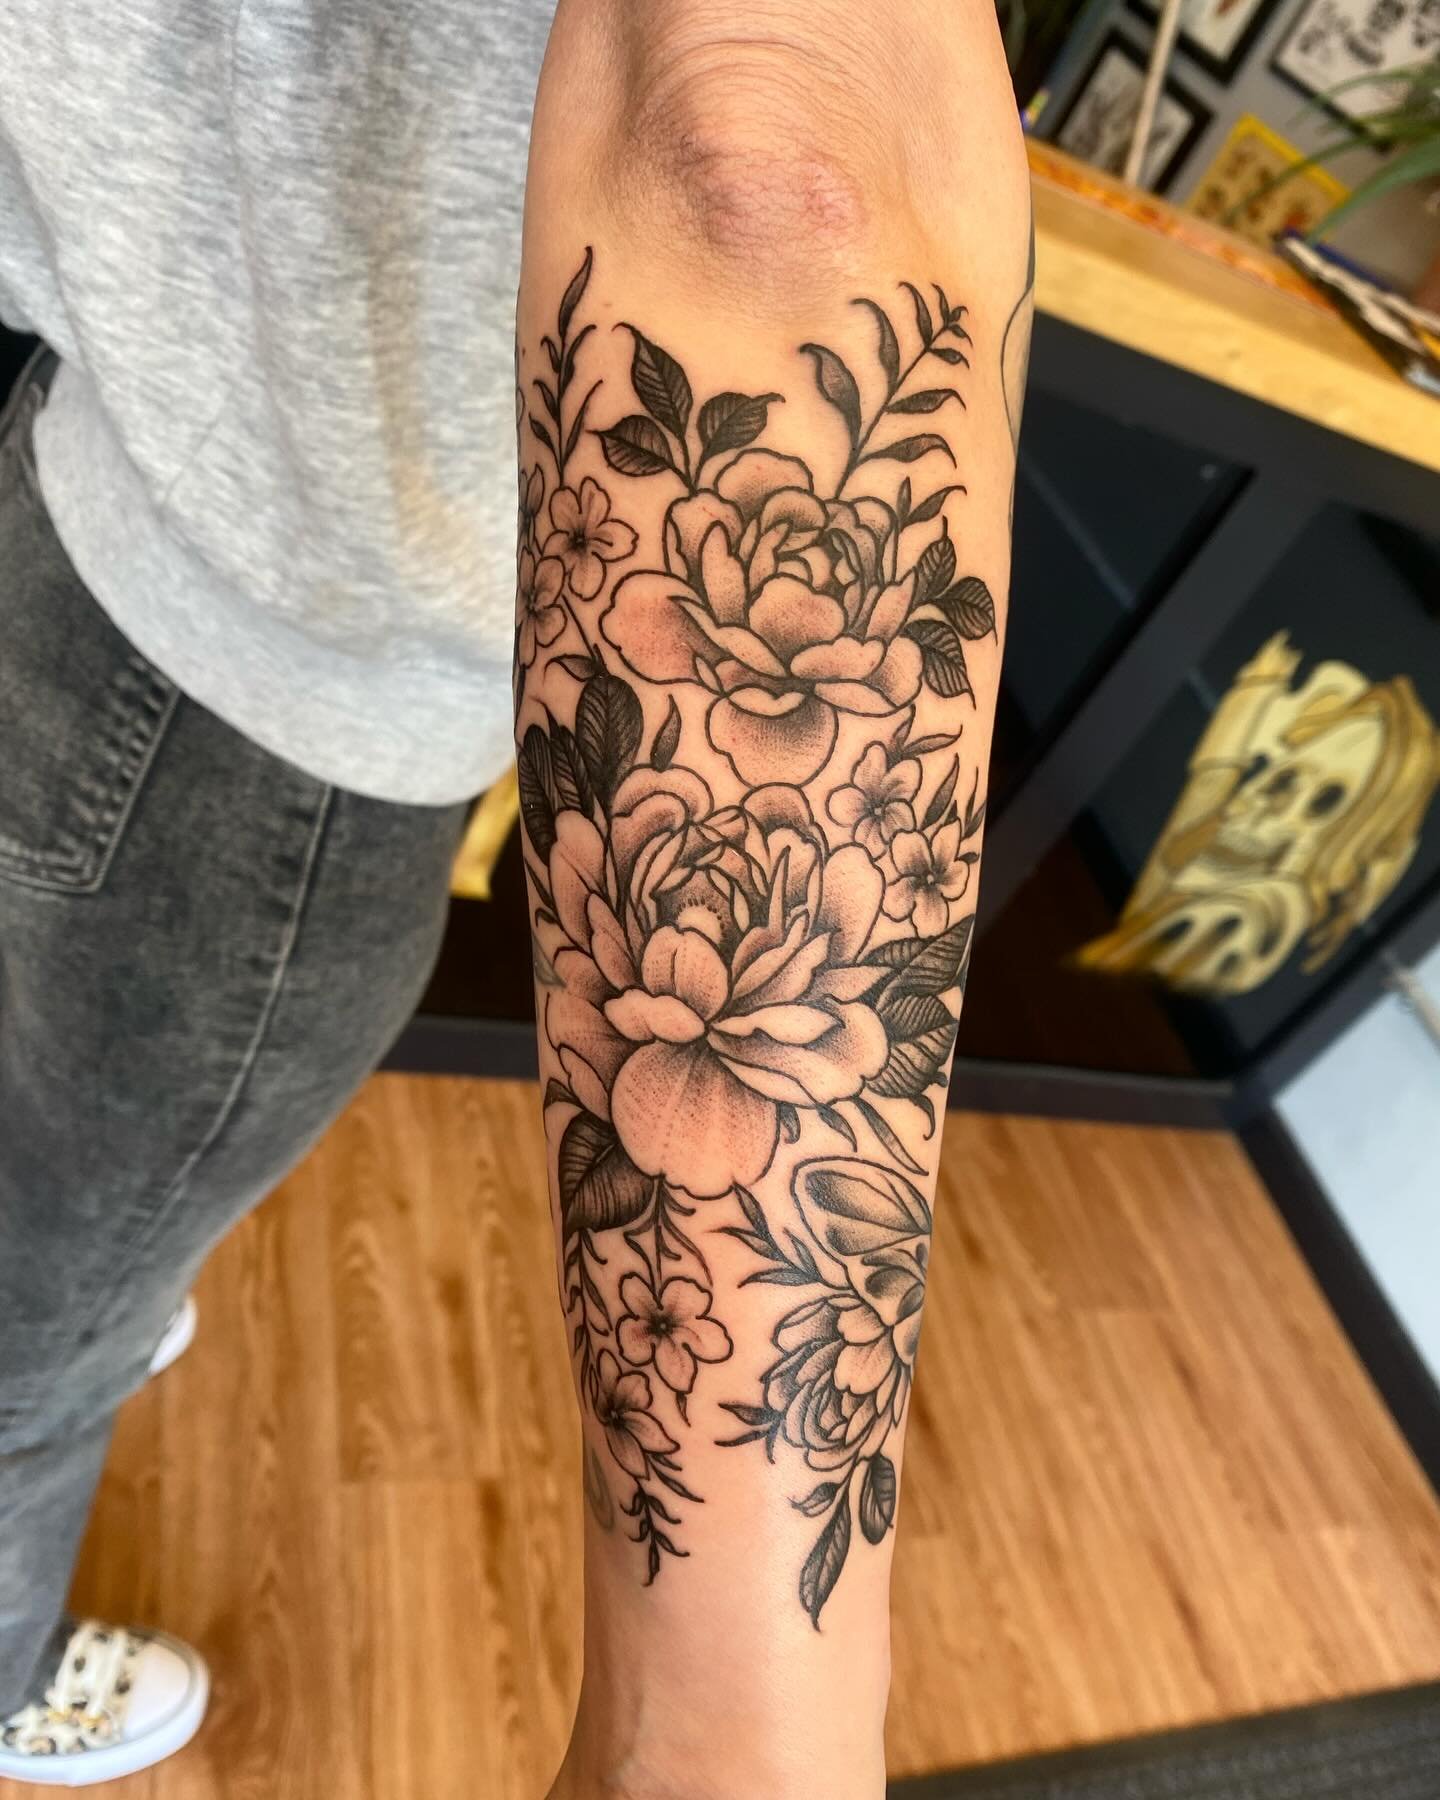 Flowers and beetle tattooed by @paulboschtattoo @twosonstattoo We book appointments and take walk-ins daily! We are a street shop, which means out booking never closes and walk-ins are first come, first served. Mon-Sat 12-8